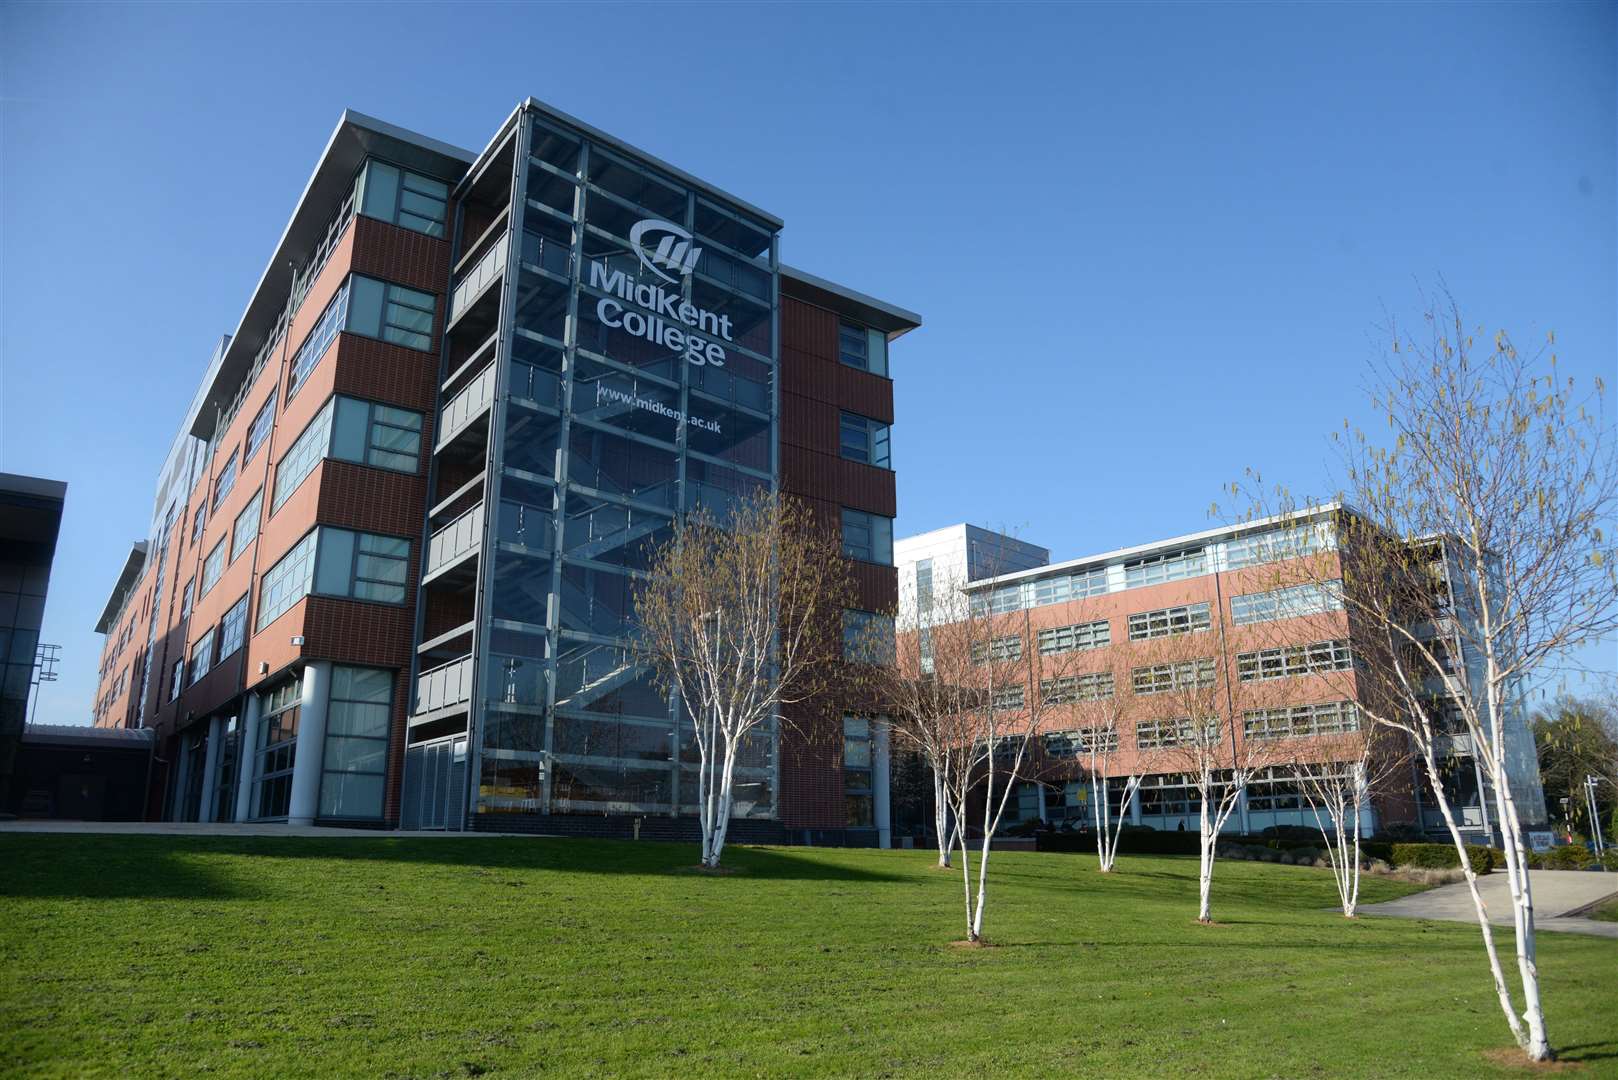 The college has another site in Medway Road, Gillingham